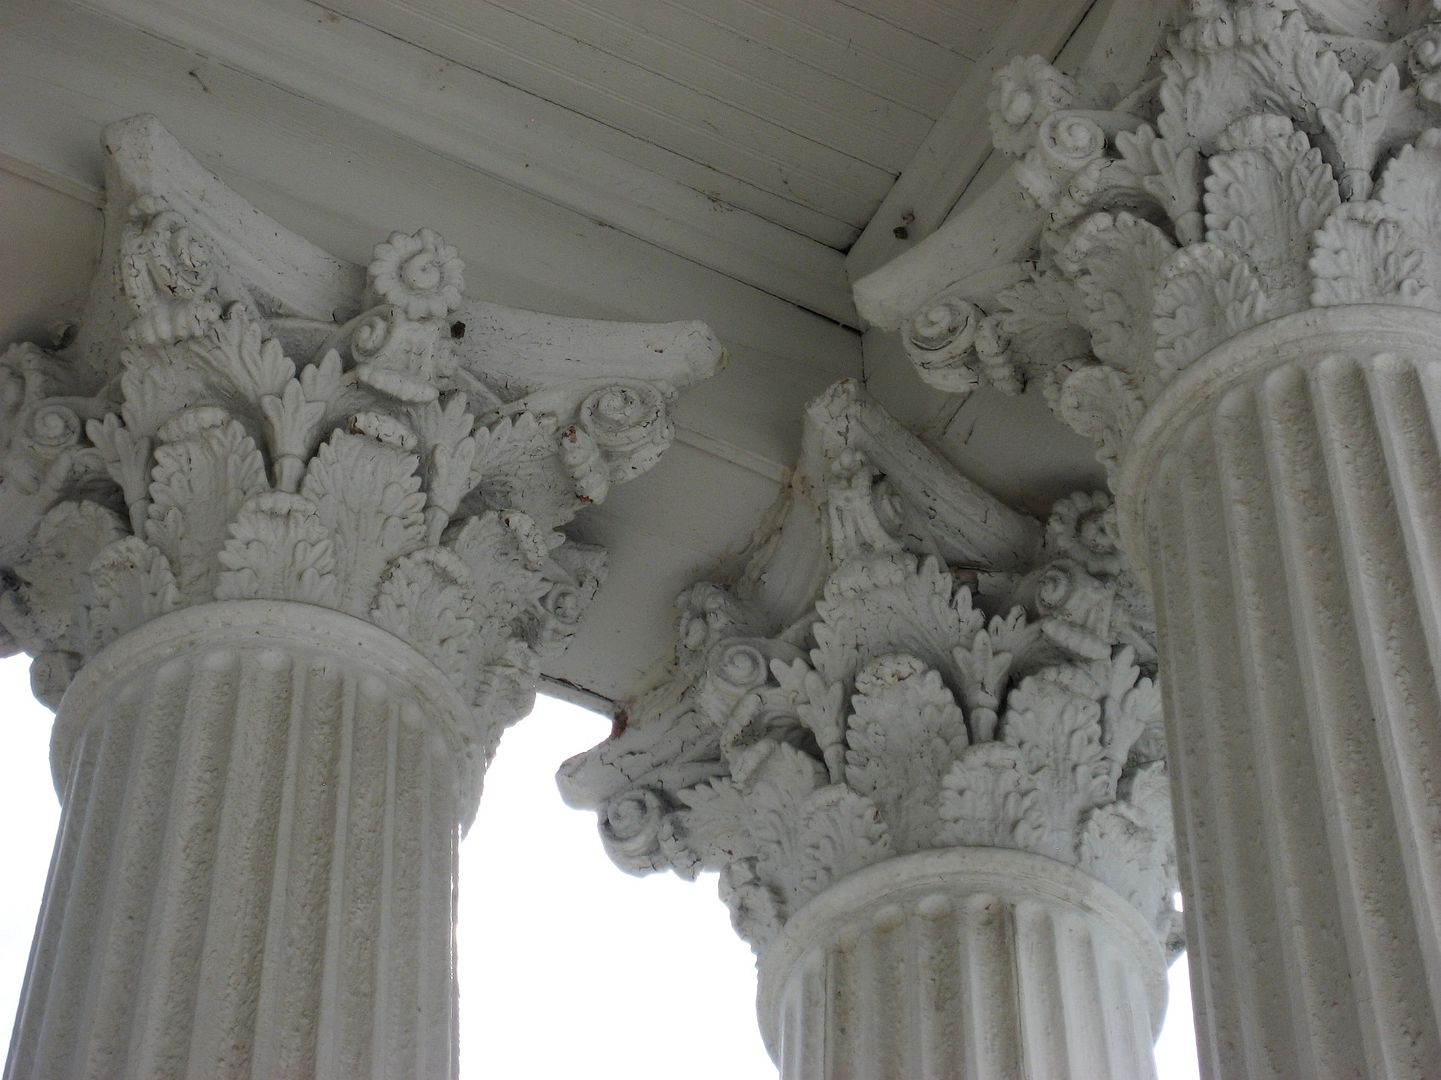 The Sears Magnolia was a fine, fine home. This photo shows detail on the Columns on the Sears Magnolia in Piedmont. 